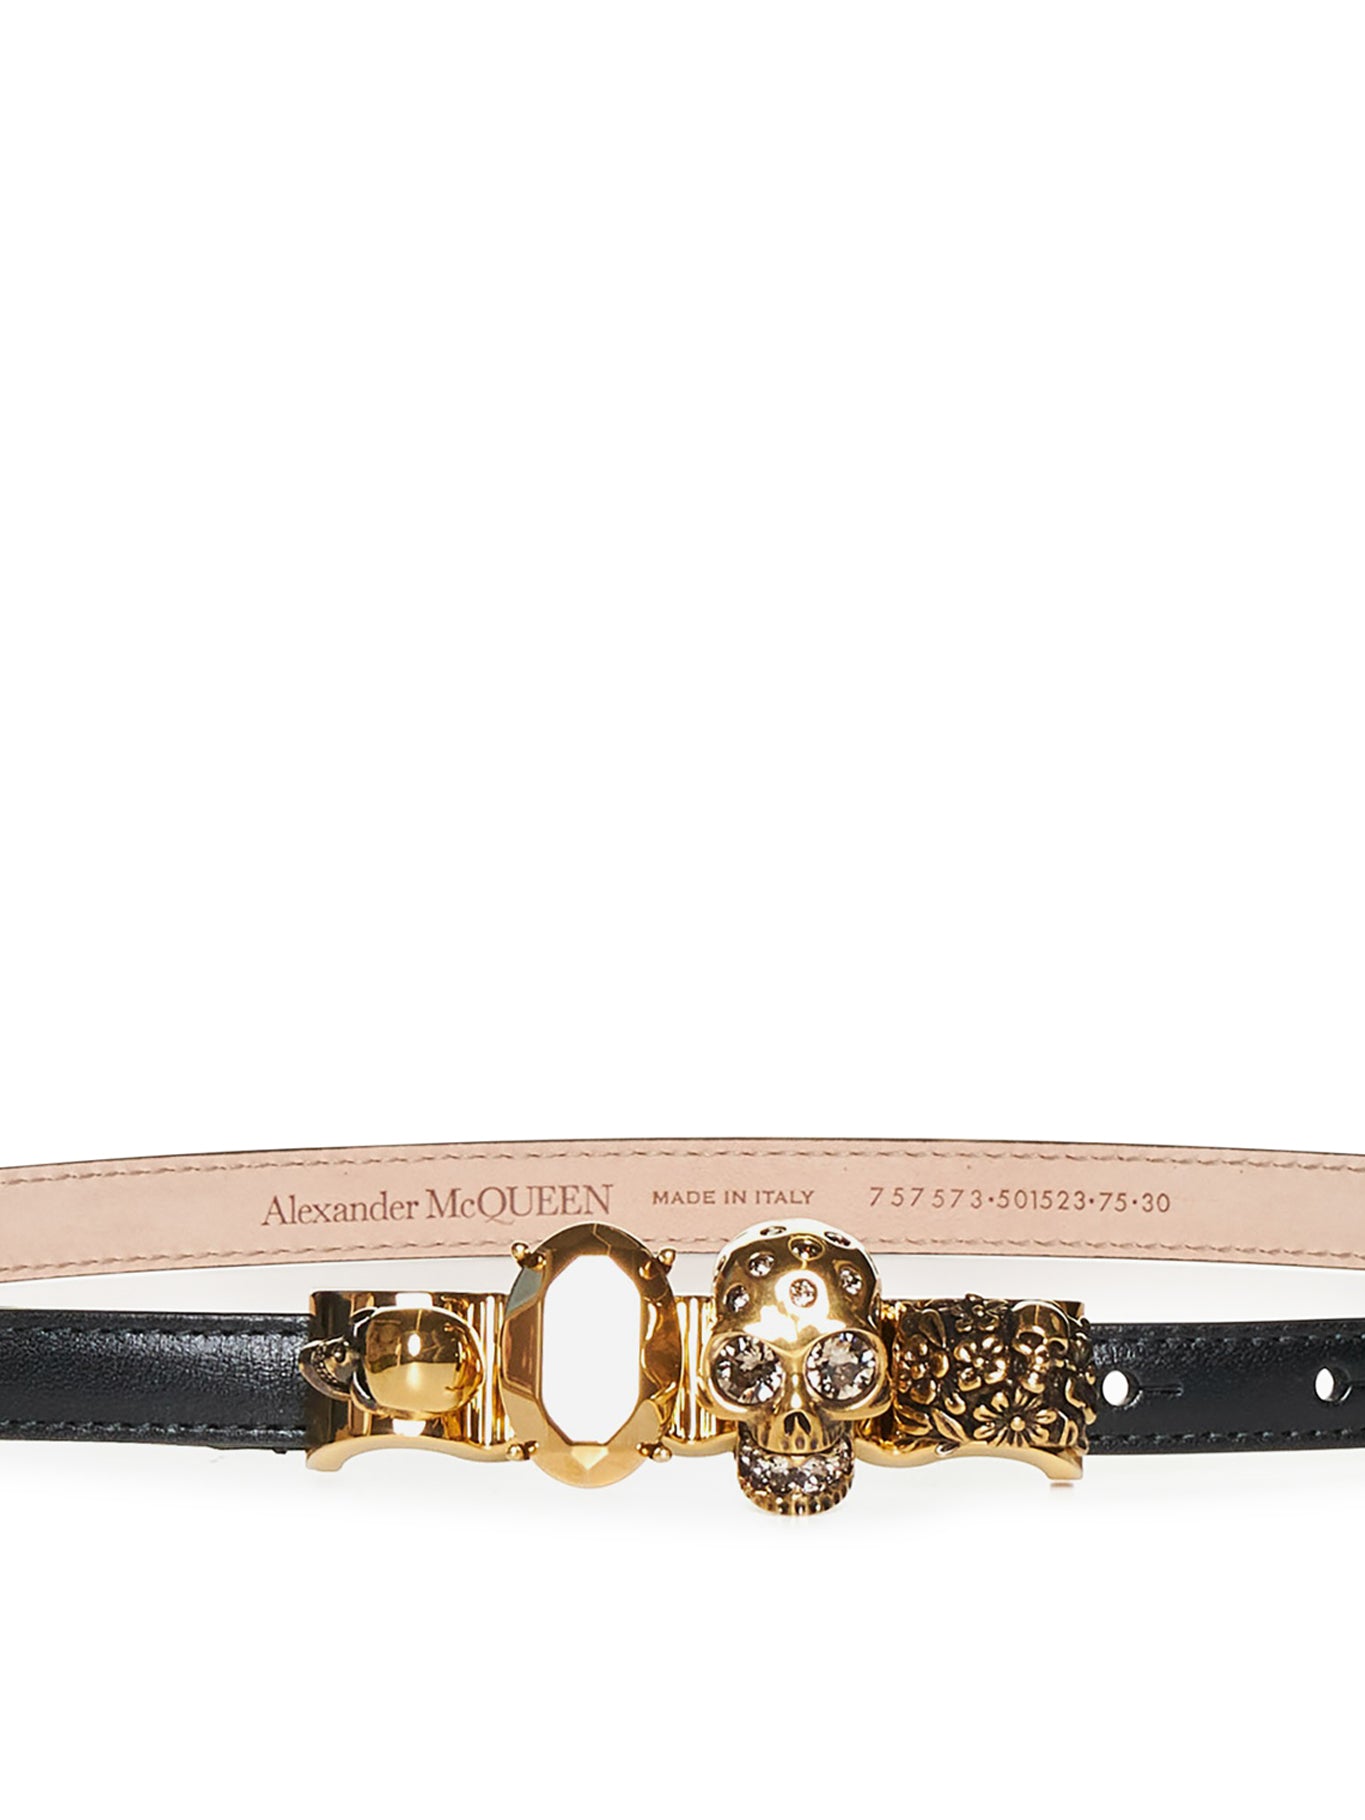 The Knuckle leather belt